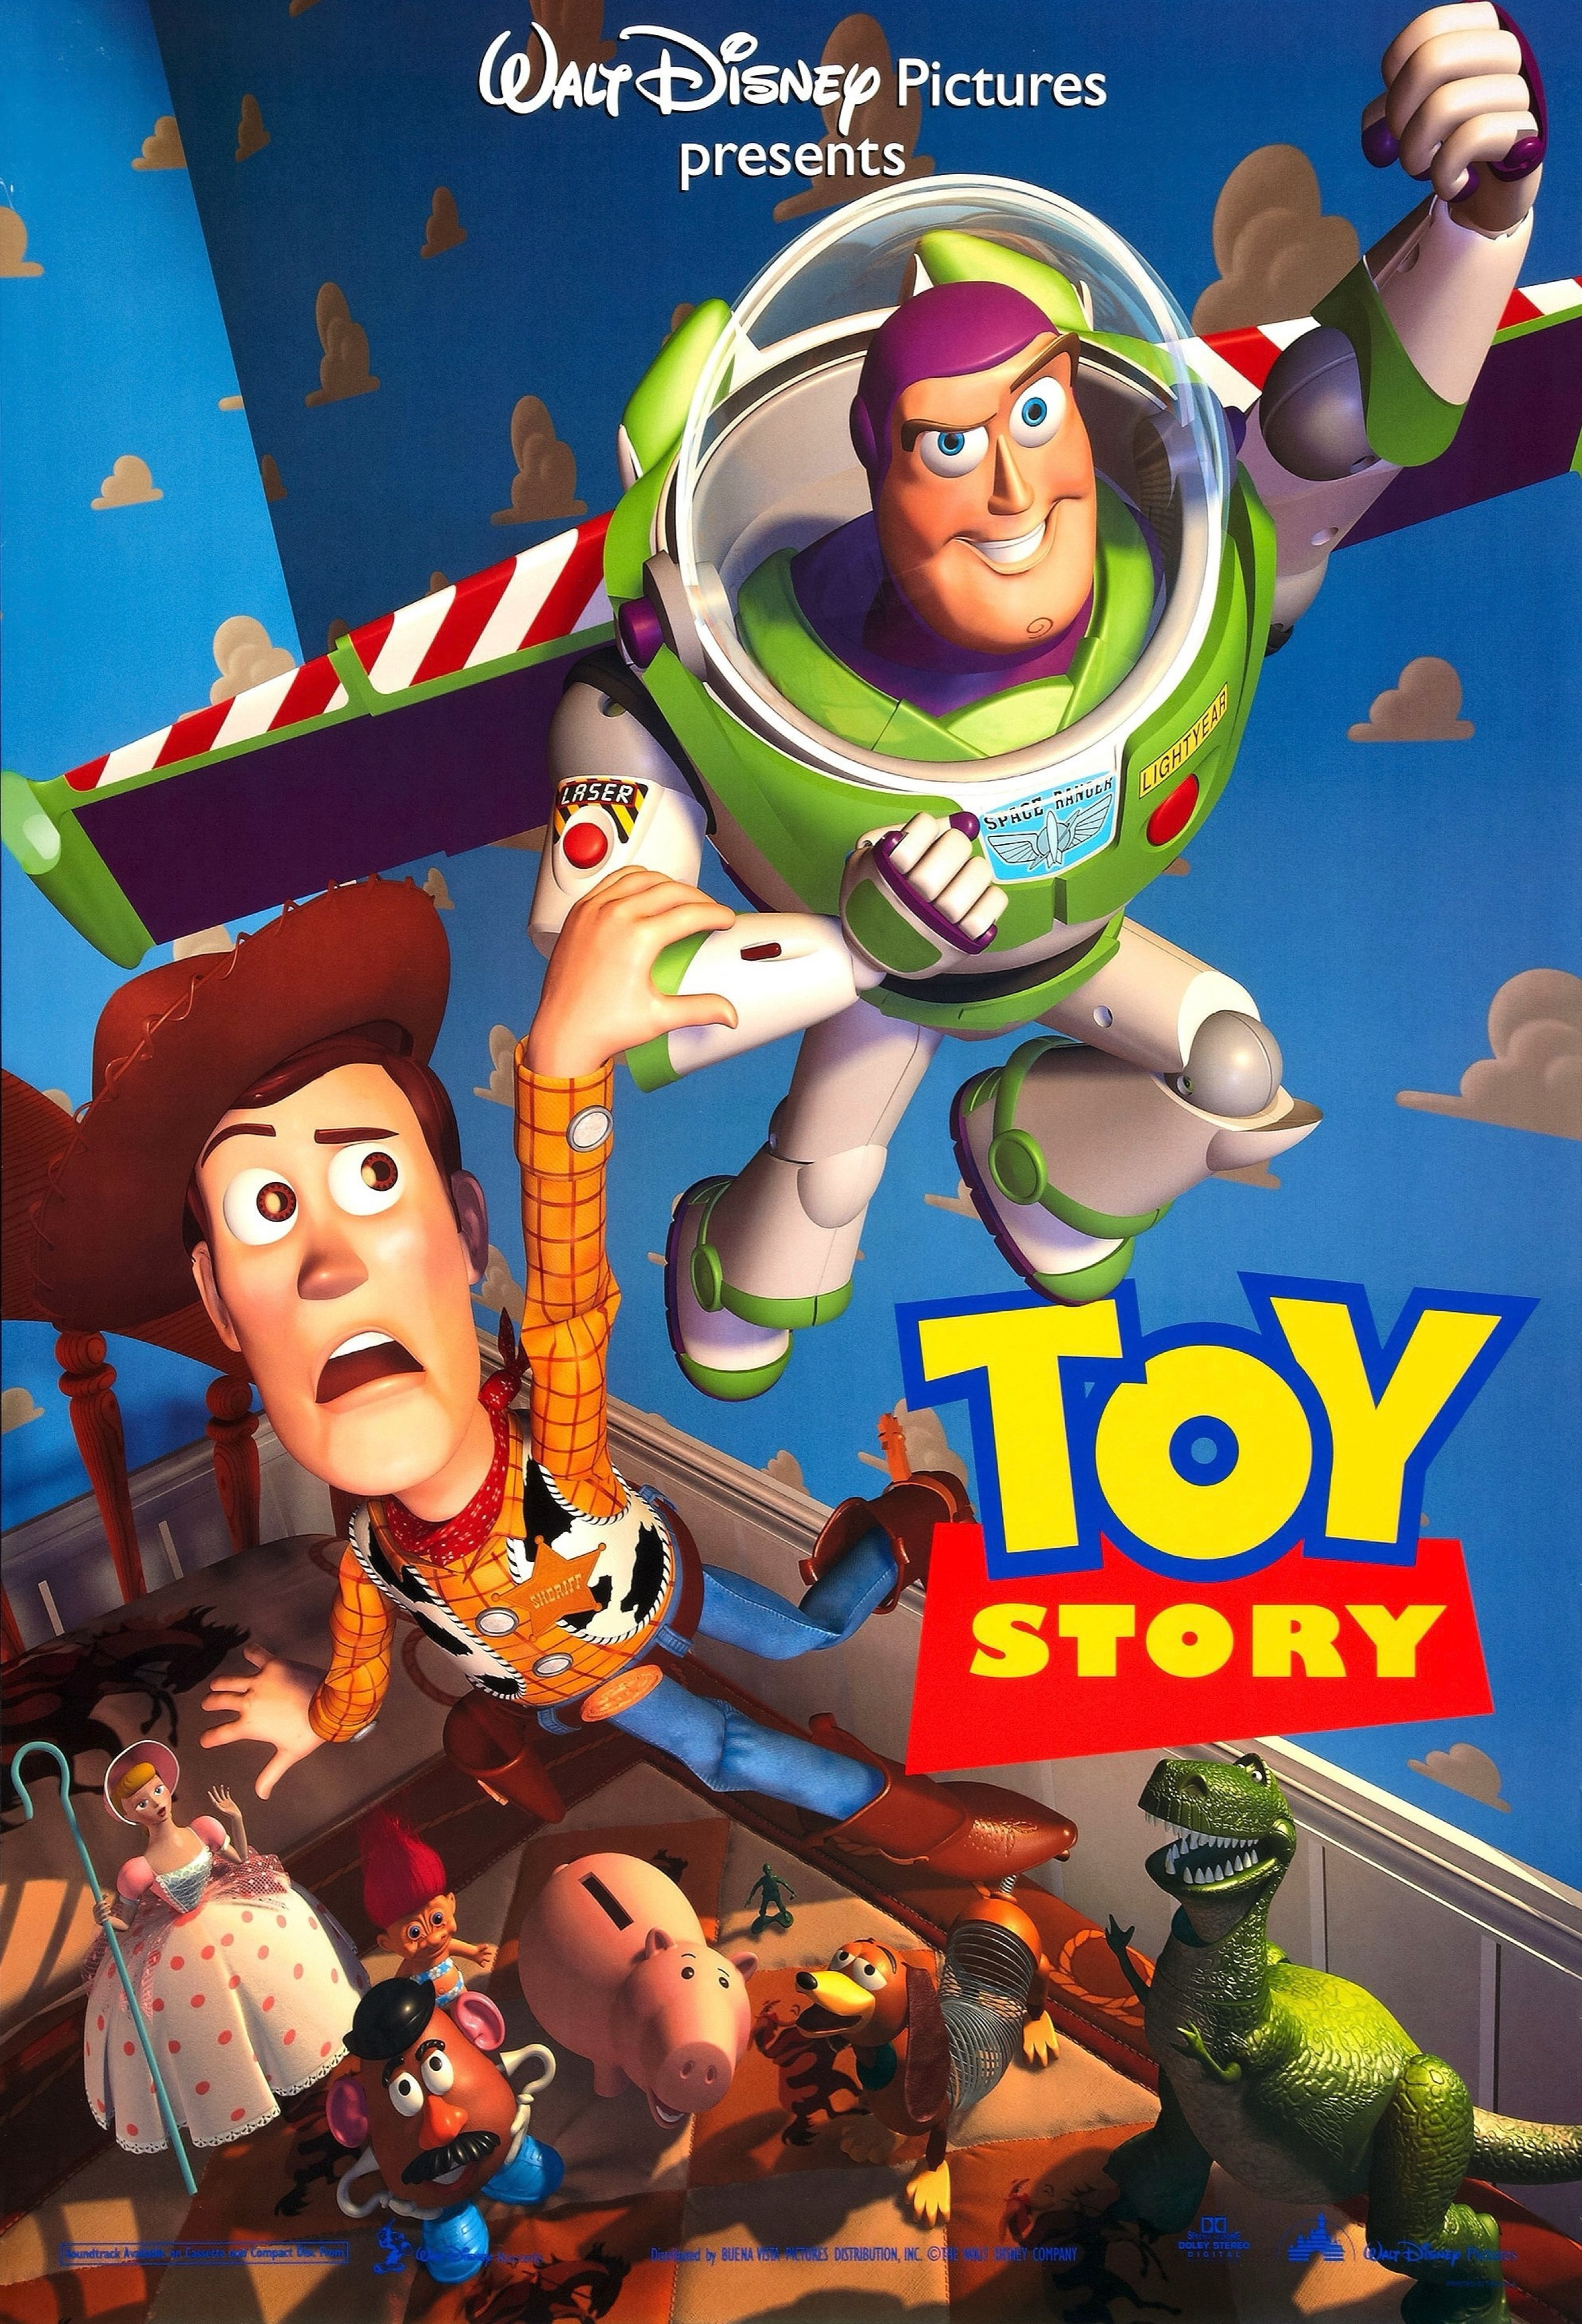 Toy Story 3 Bonnie voice actor reveals heartbreaking life story